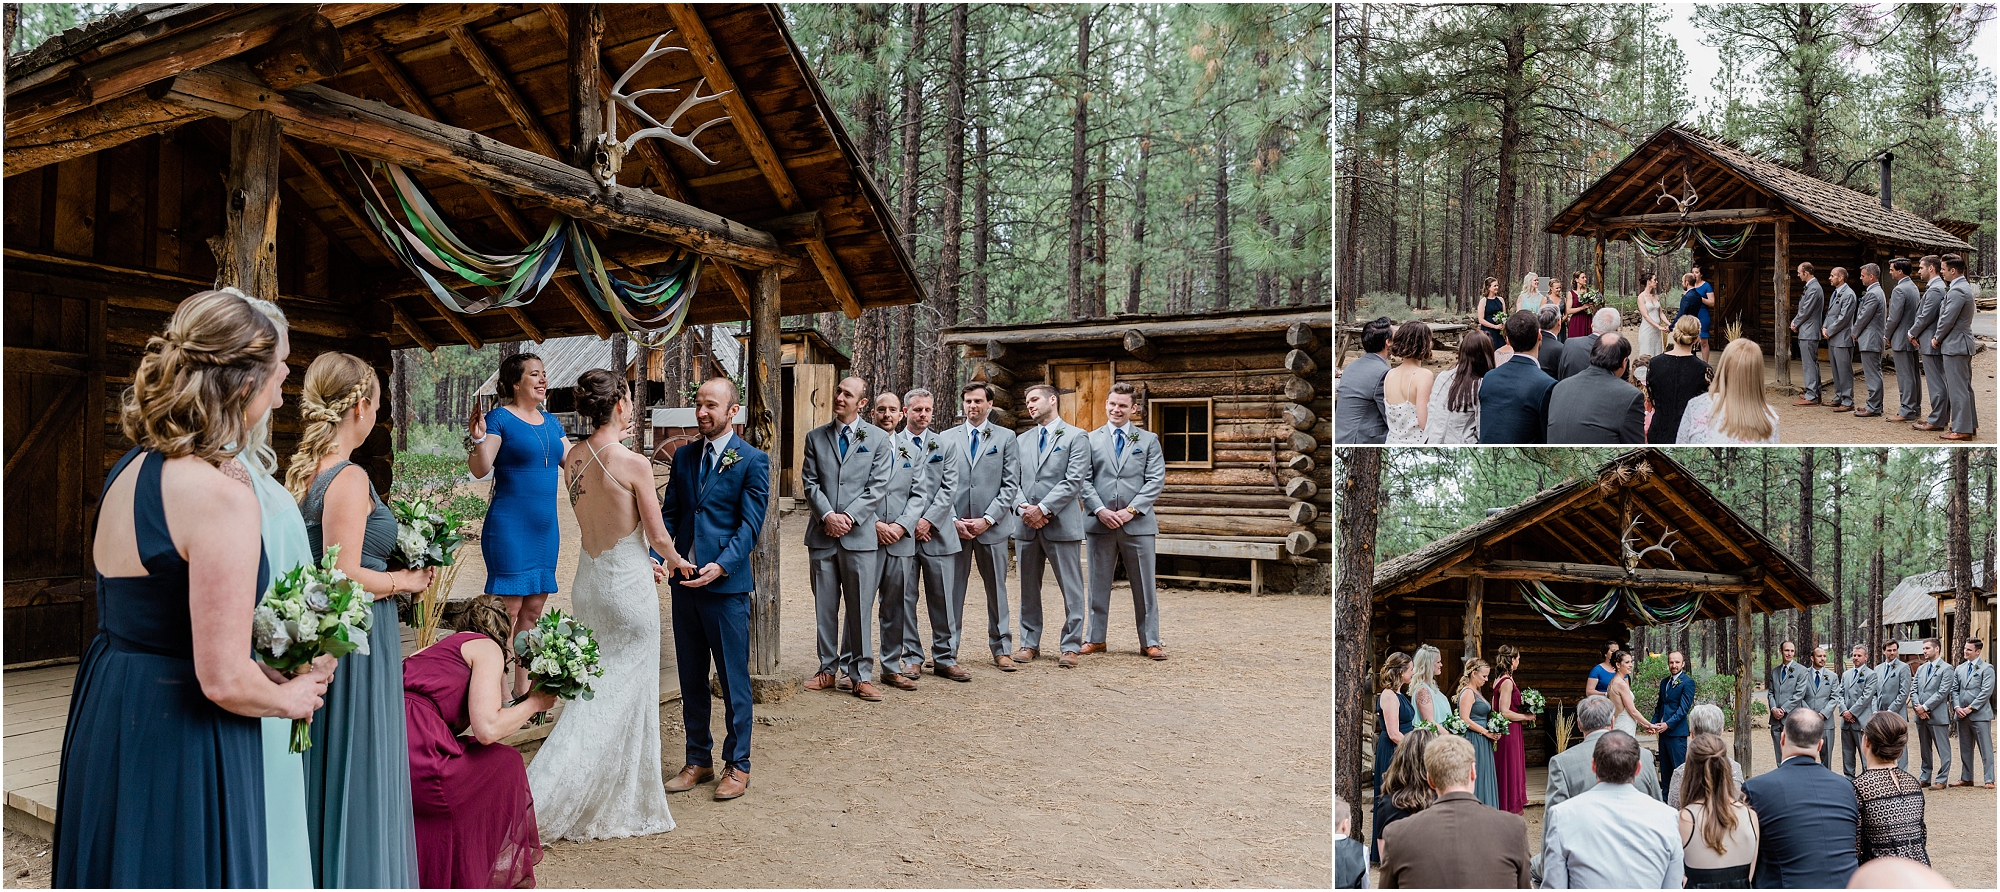 The Miller Family Ranch is a rustic ceremony location within the High Desert Museum wedding venue in Central Oregon. | Erica Swantek Photography